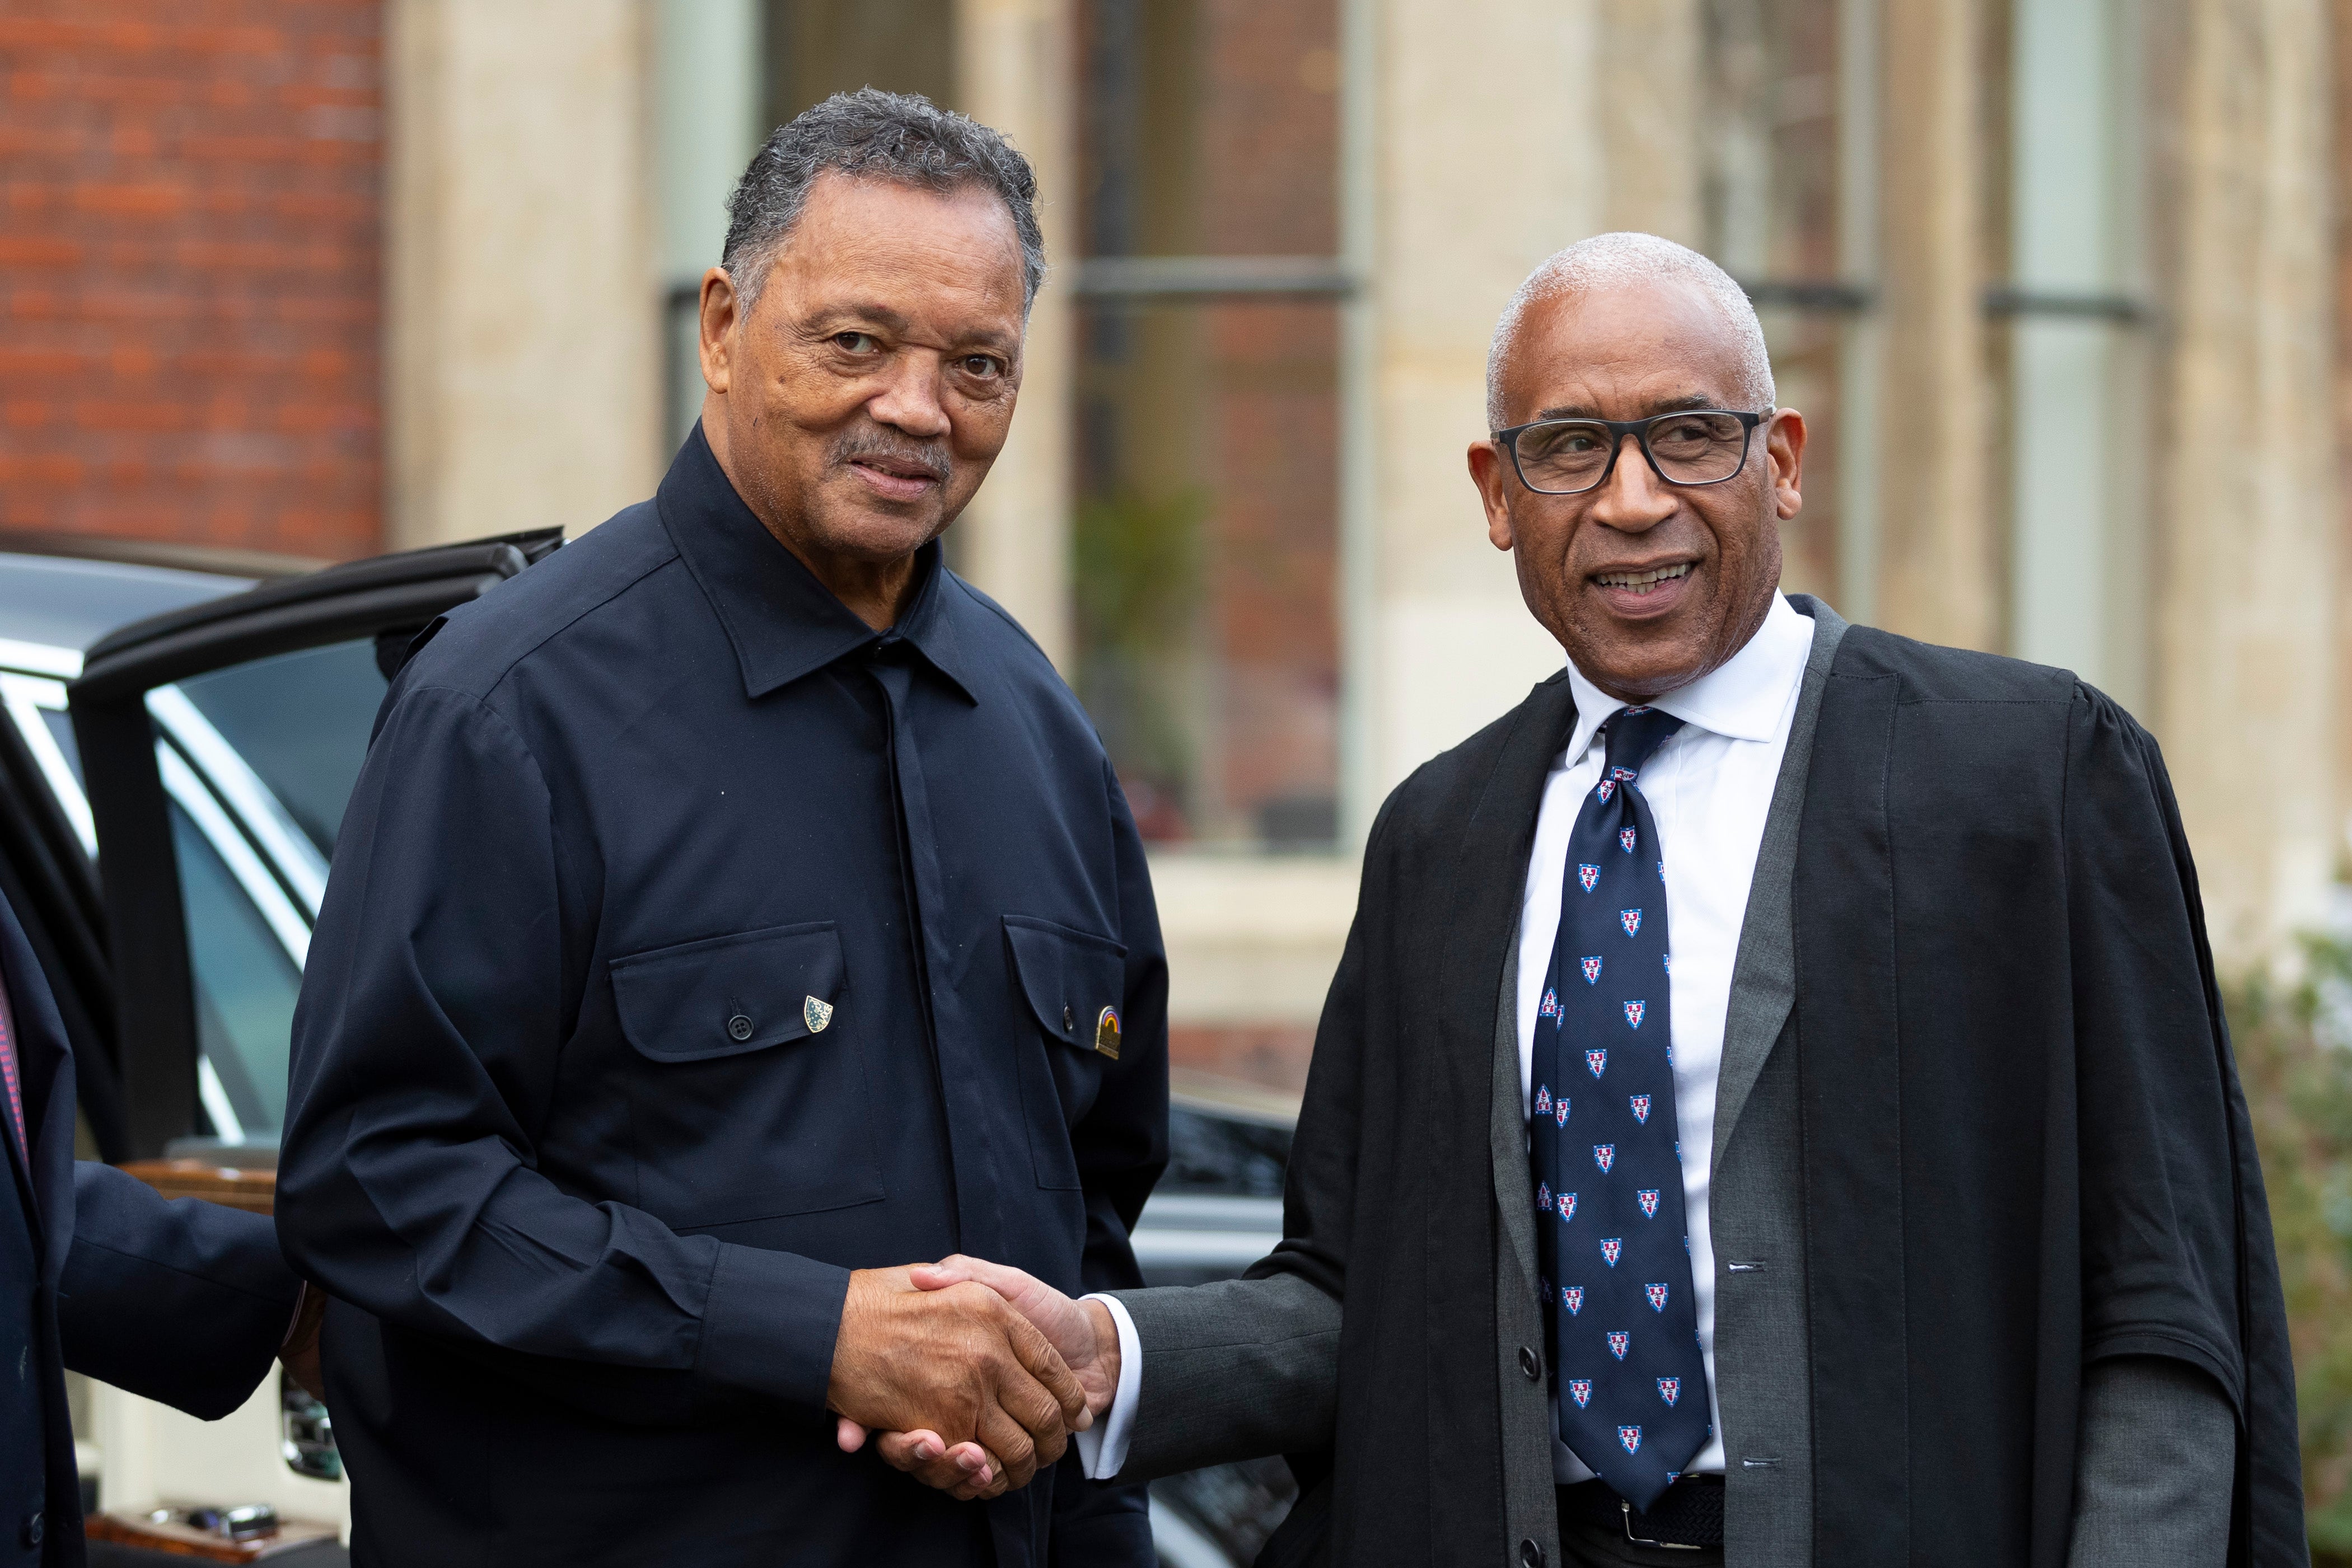 US civil rights activist Reverend Jesse Jackson has been made an honorary fellow of Cambridge’s Homerton College. He is pictured with the college’s principal Lord Woolley (David Johnson/ PA)